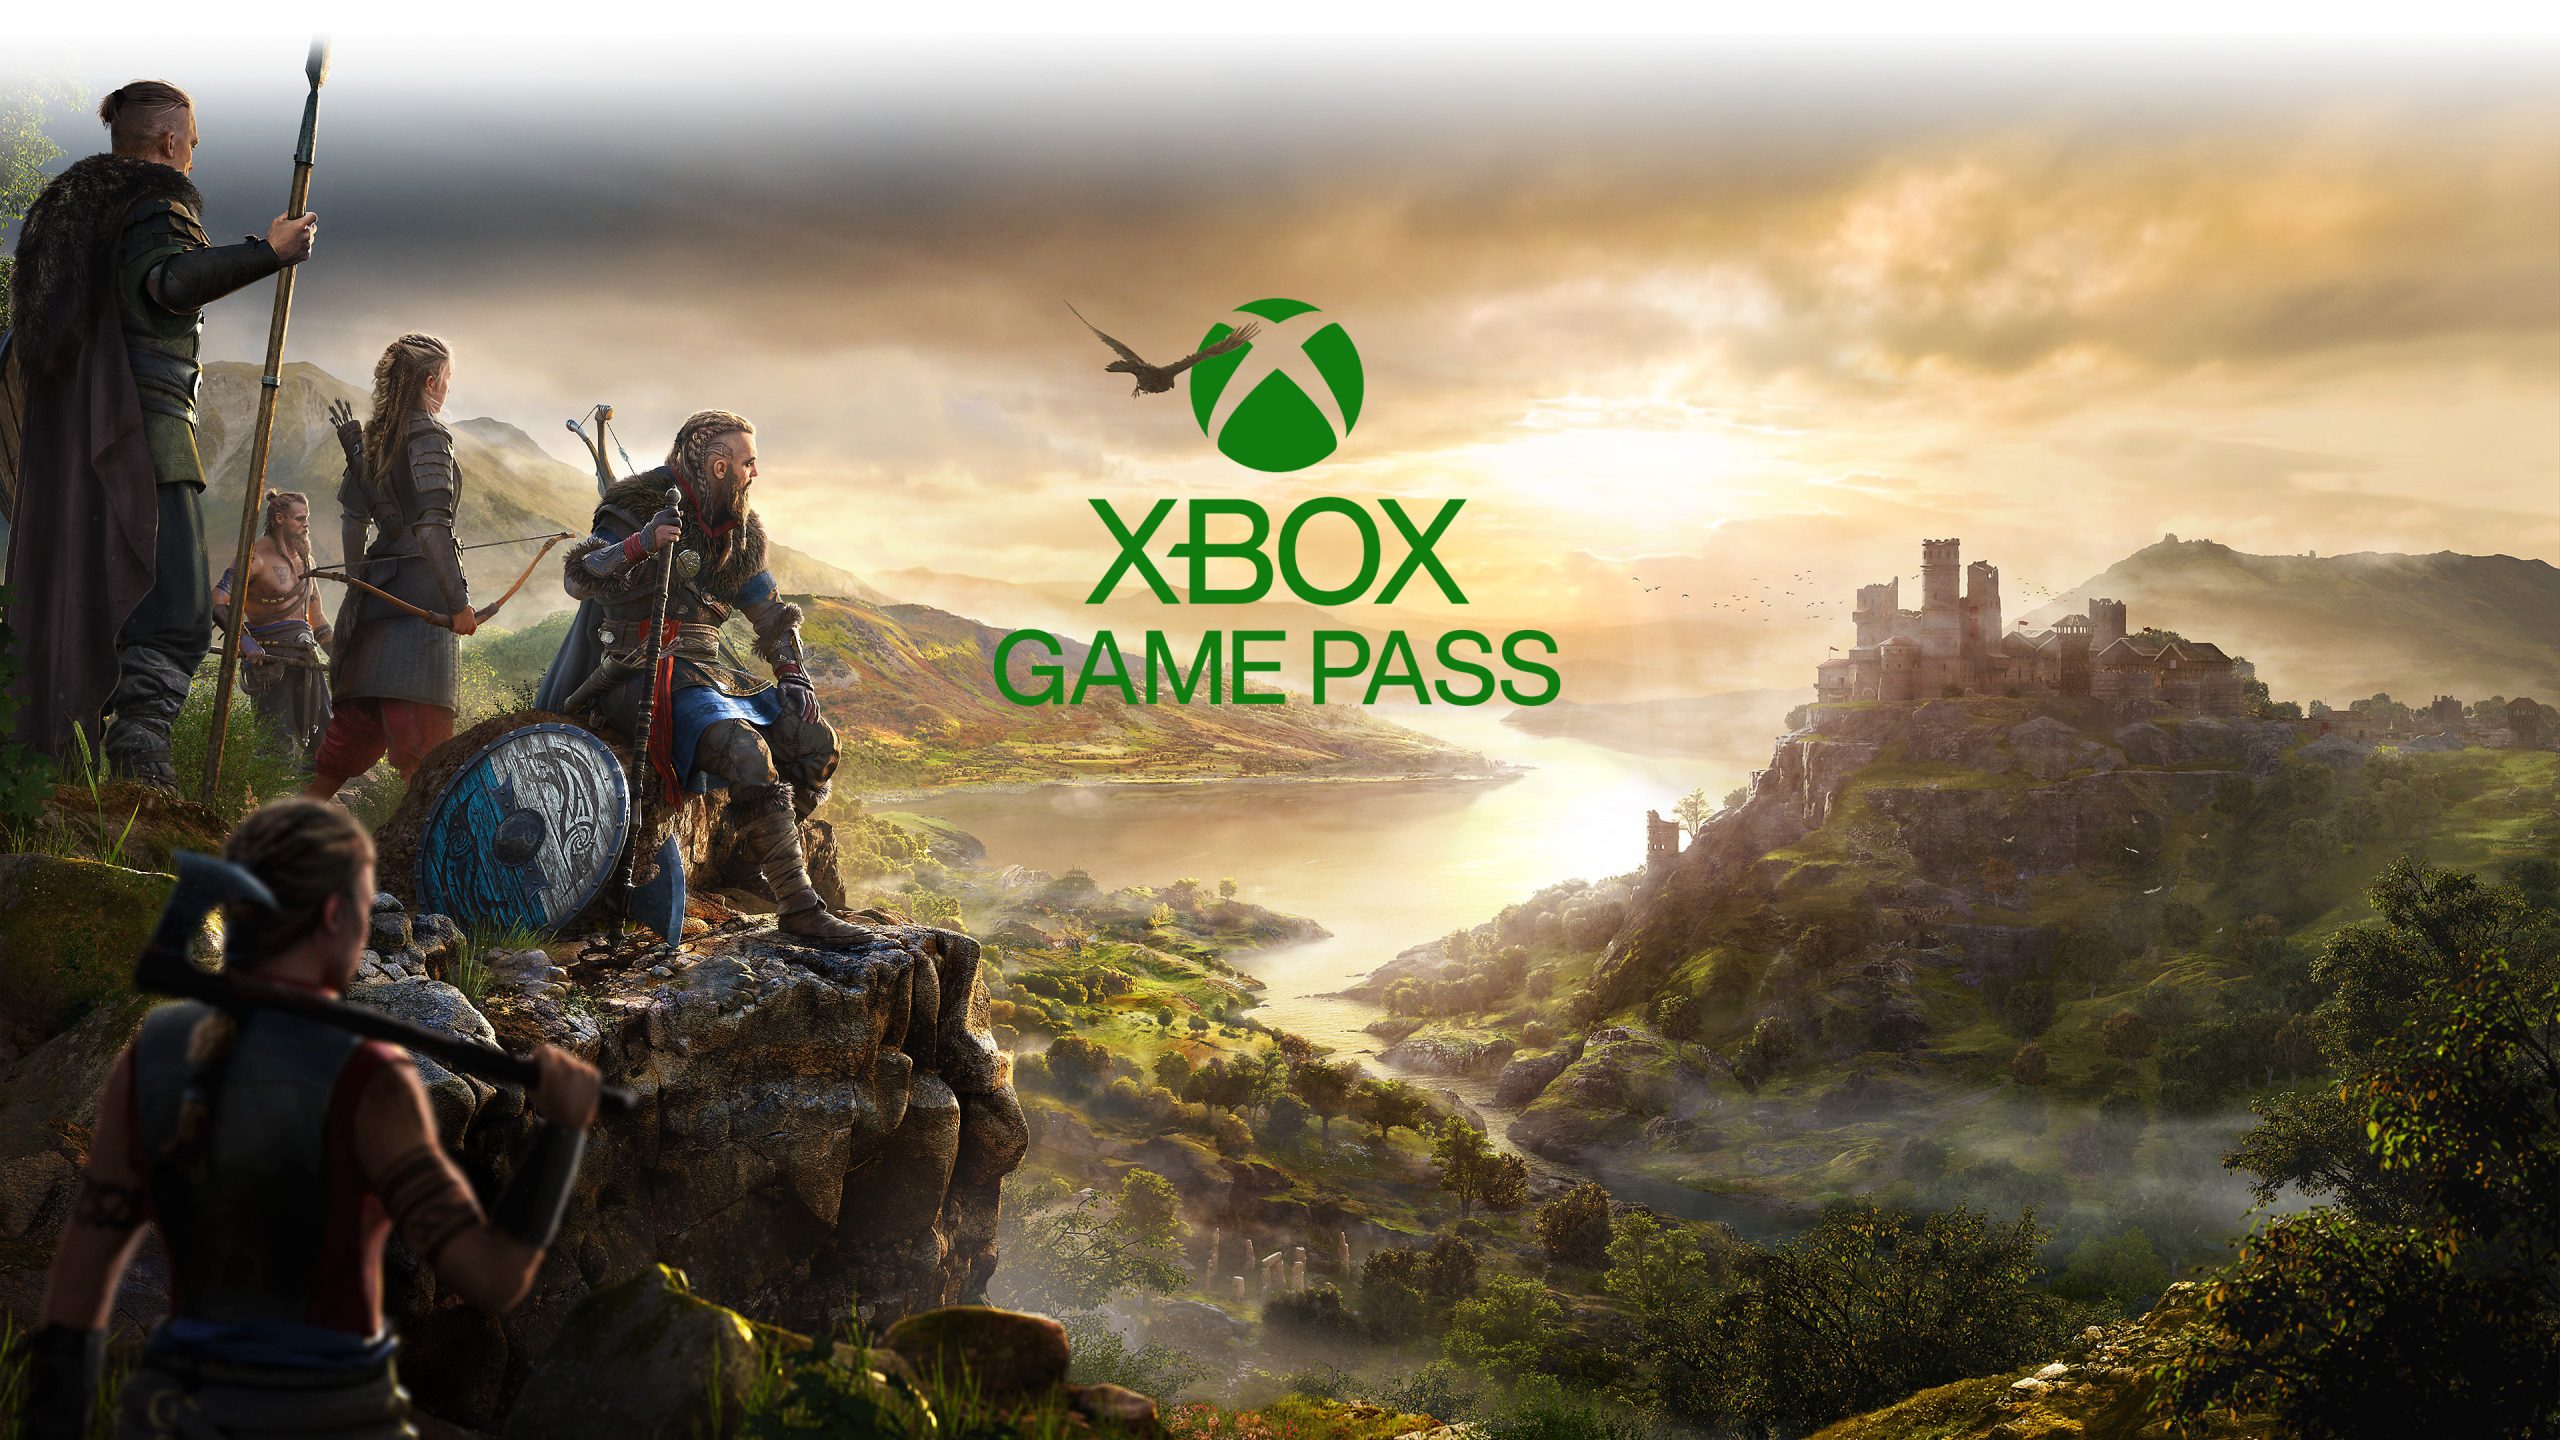 Assassin's Creed Valhalla Post Launch and Season Pass Content Revealed -  Niche Gamer